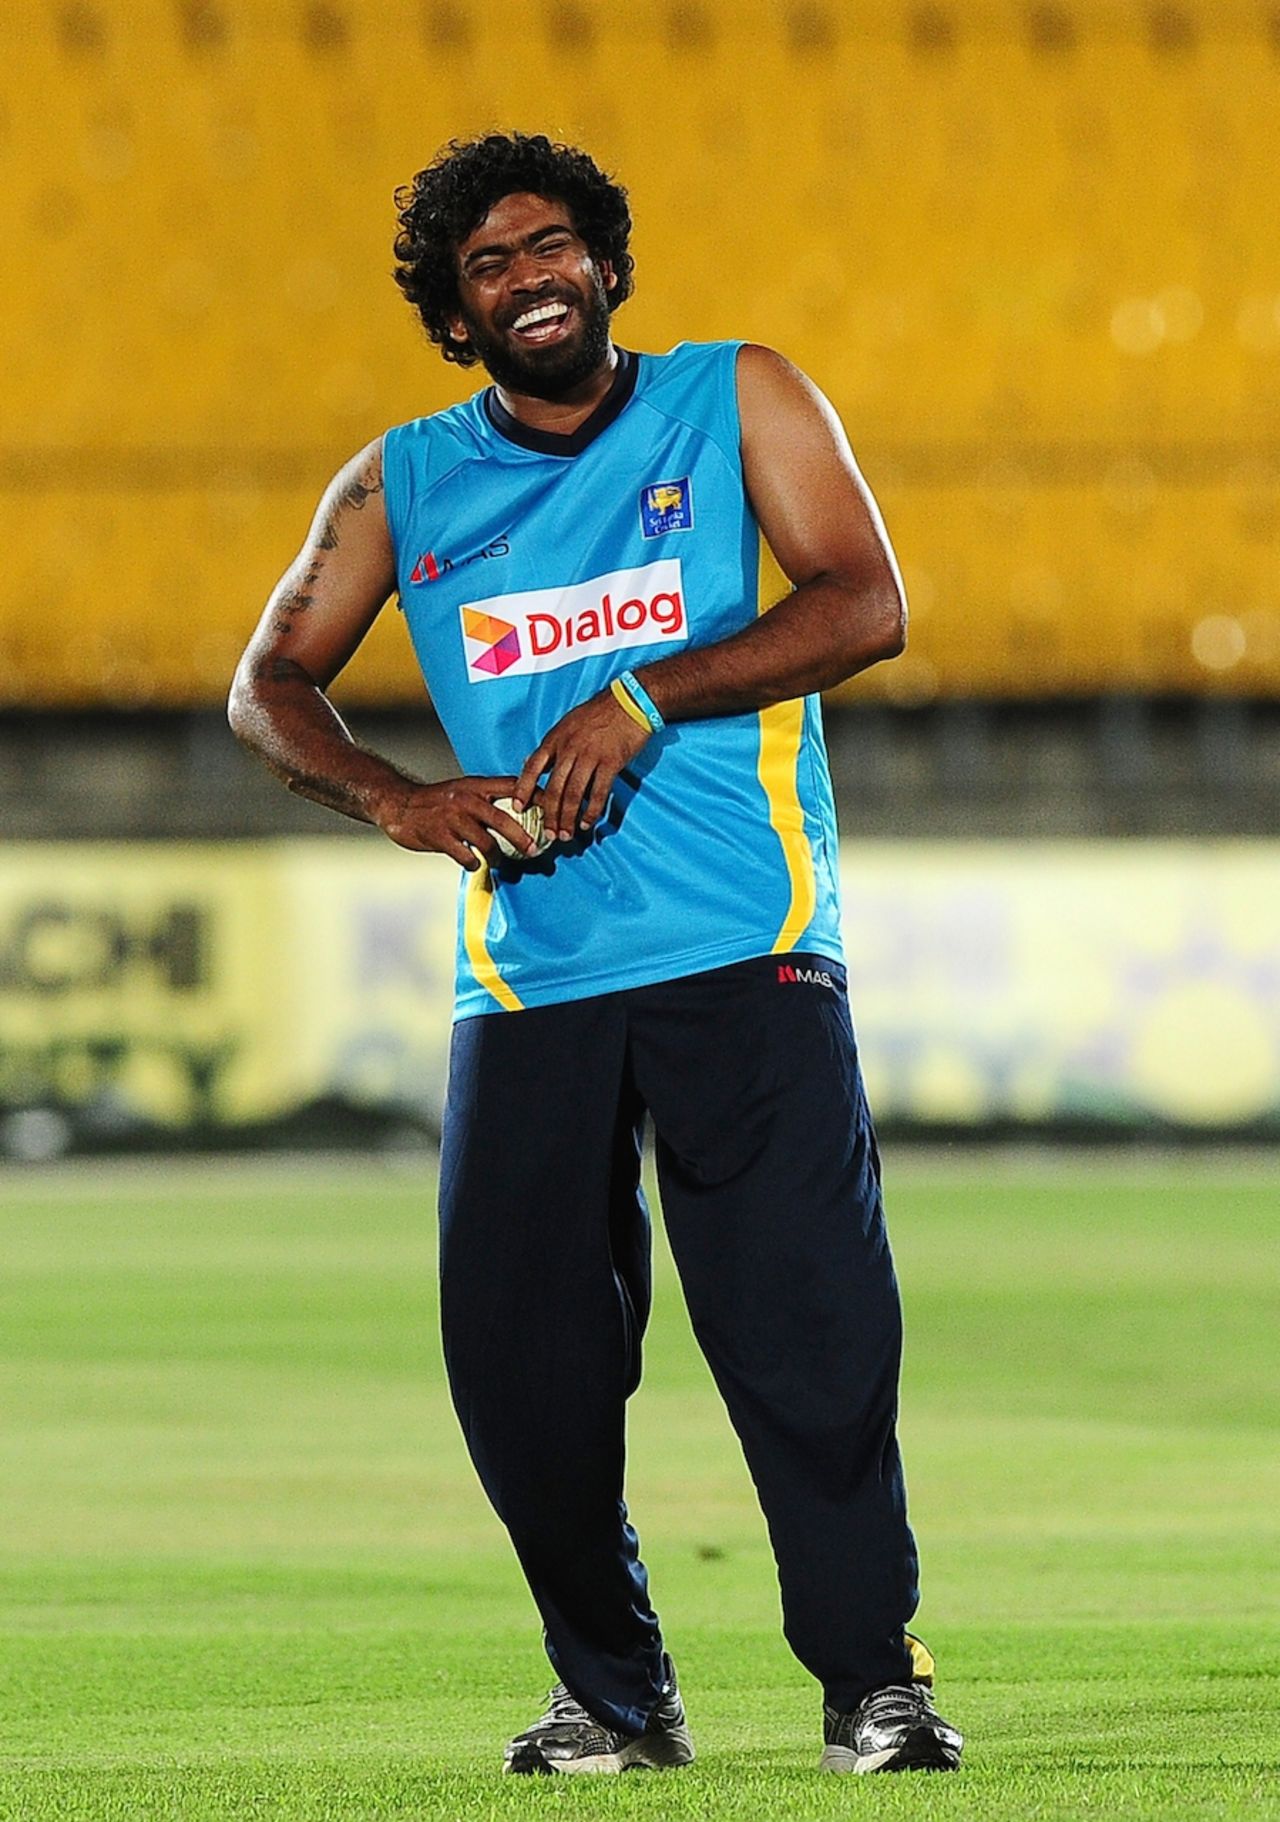 Lasith Malinga has a laugh during a practice session ahead of the second ODI, Hambantota, August 25, 2014